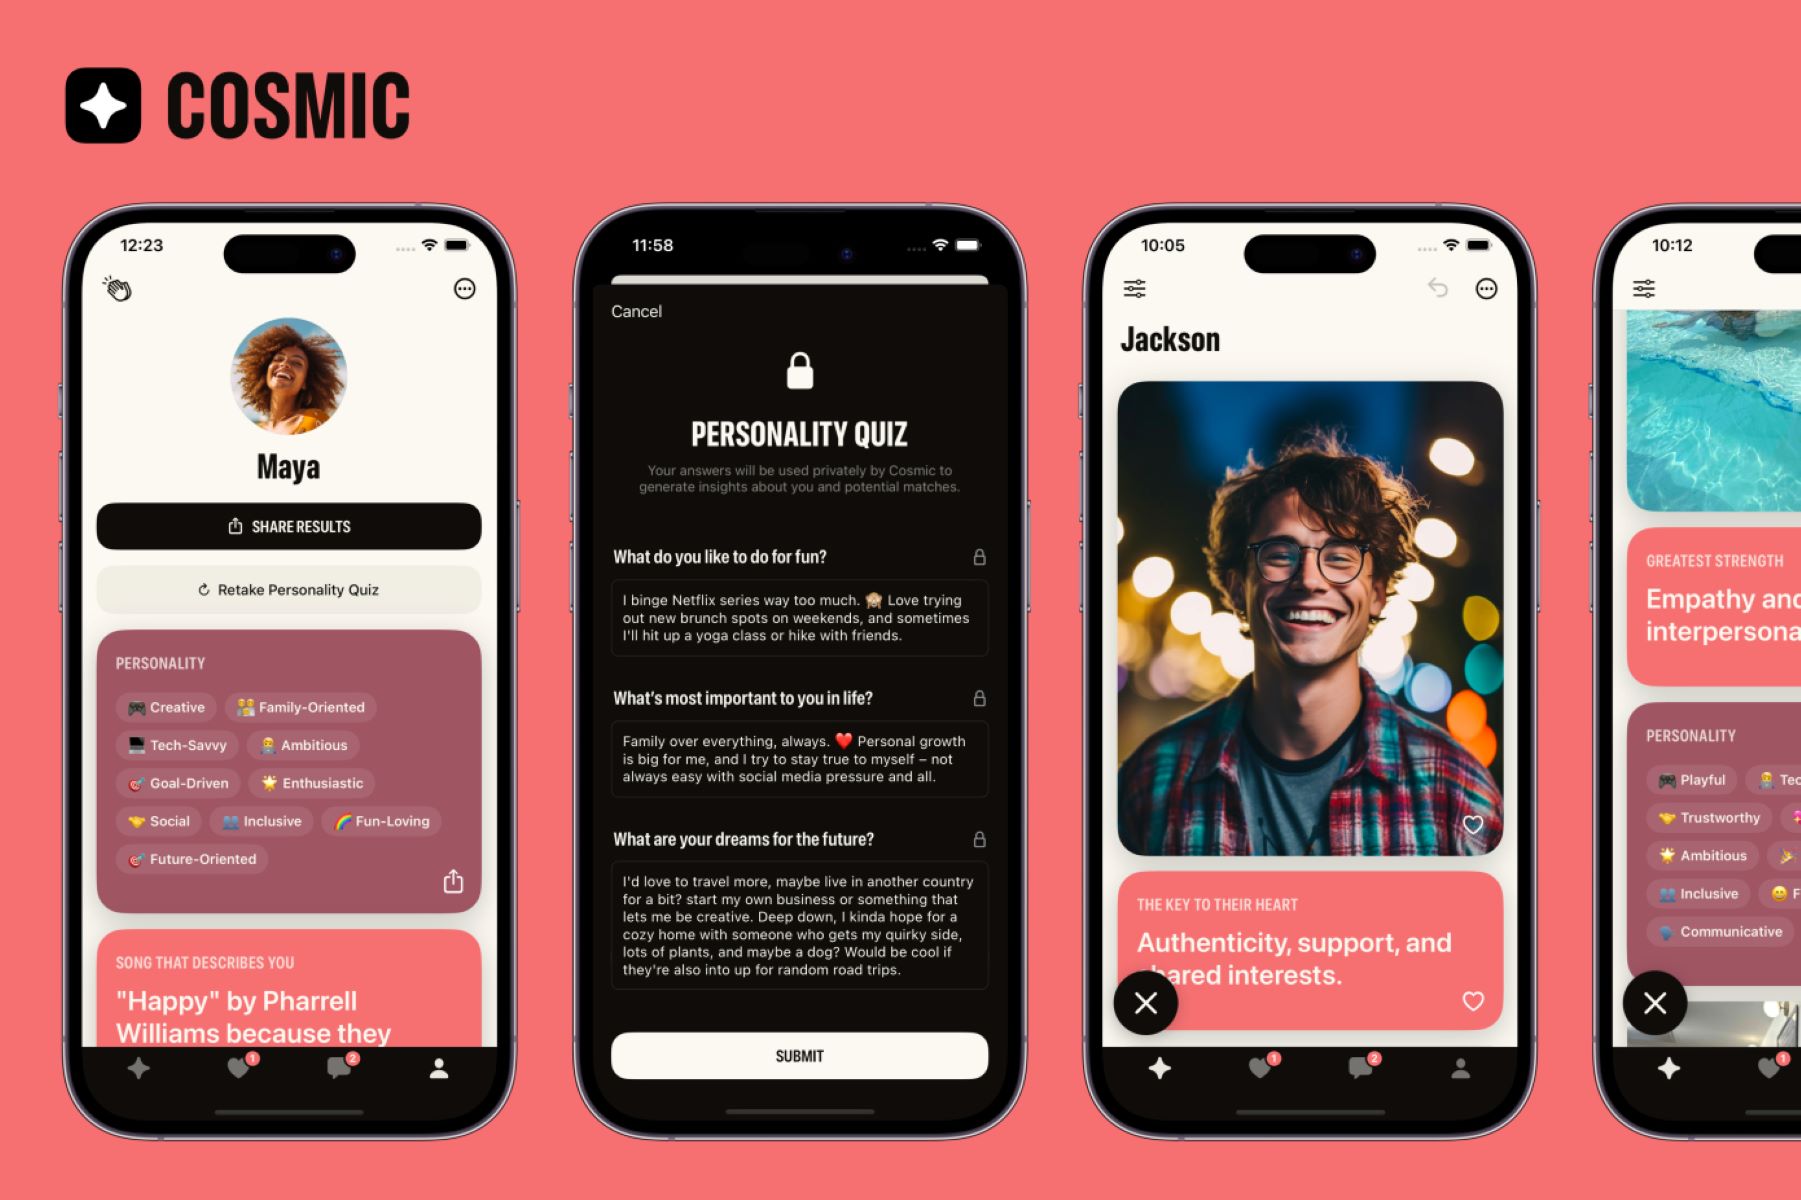 revolutionizing-online-dating-cosmic-dating-app-utilizes-personality-quizzes-to-create-unique-user-profiles